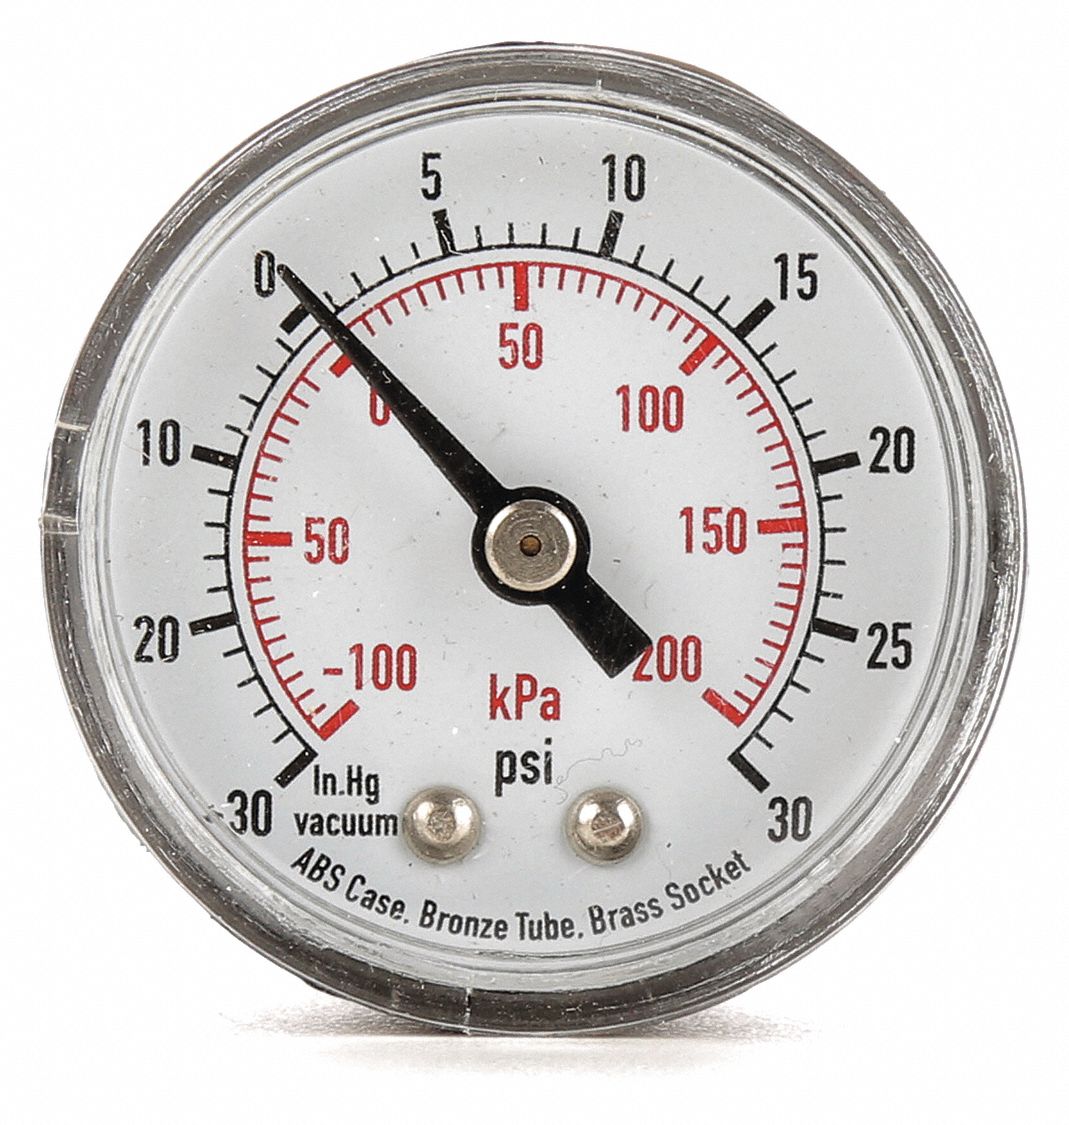 30 in Compound Gauge Hg VAC to 0 30 psi 